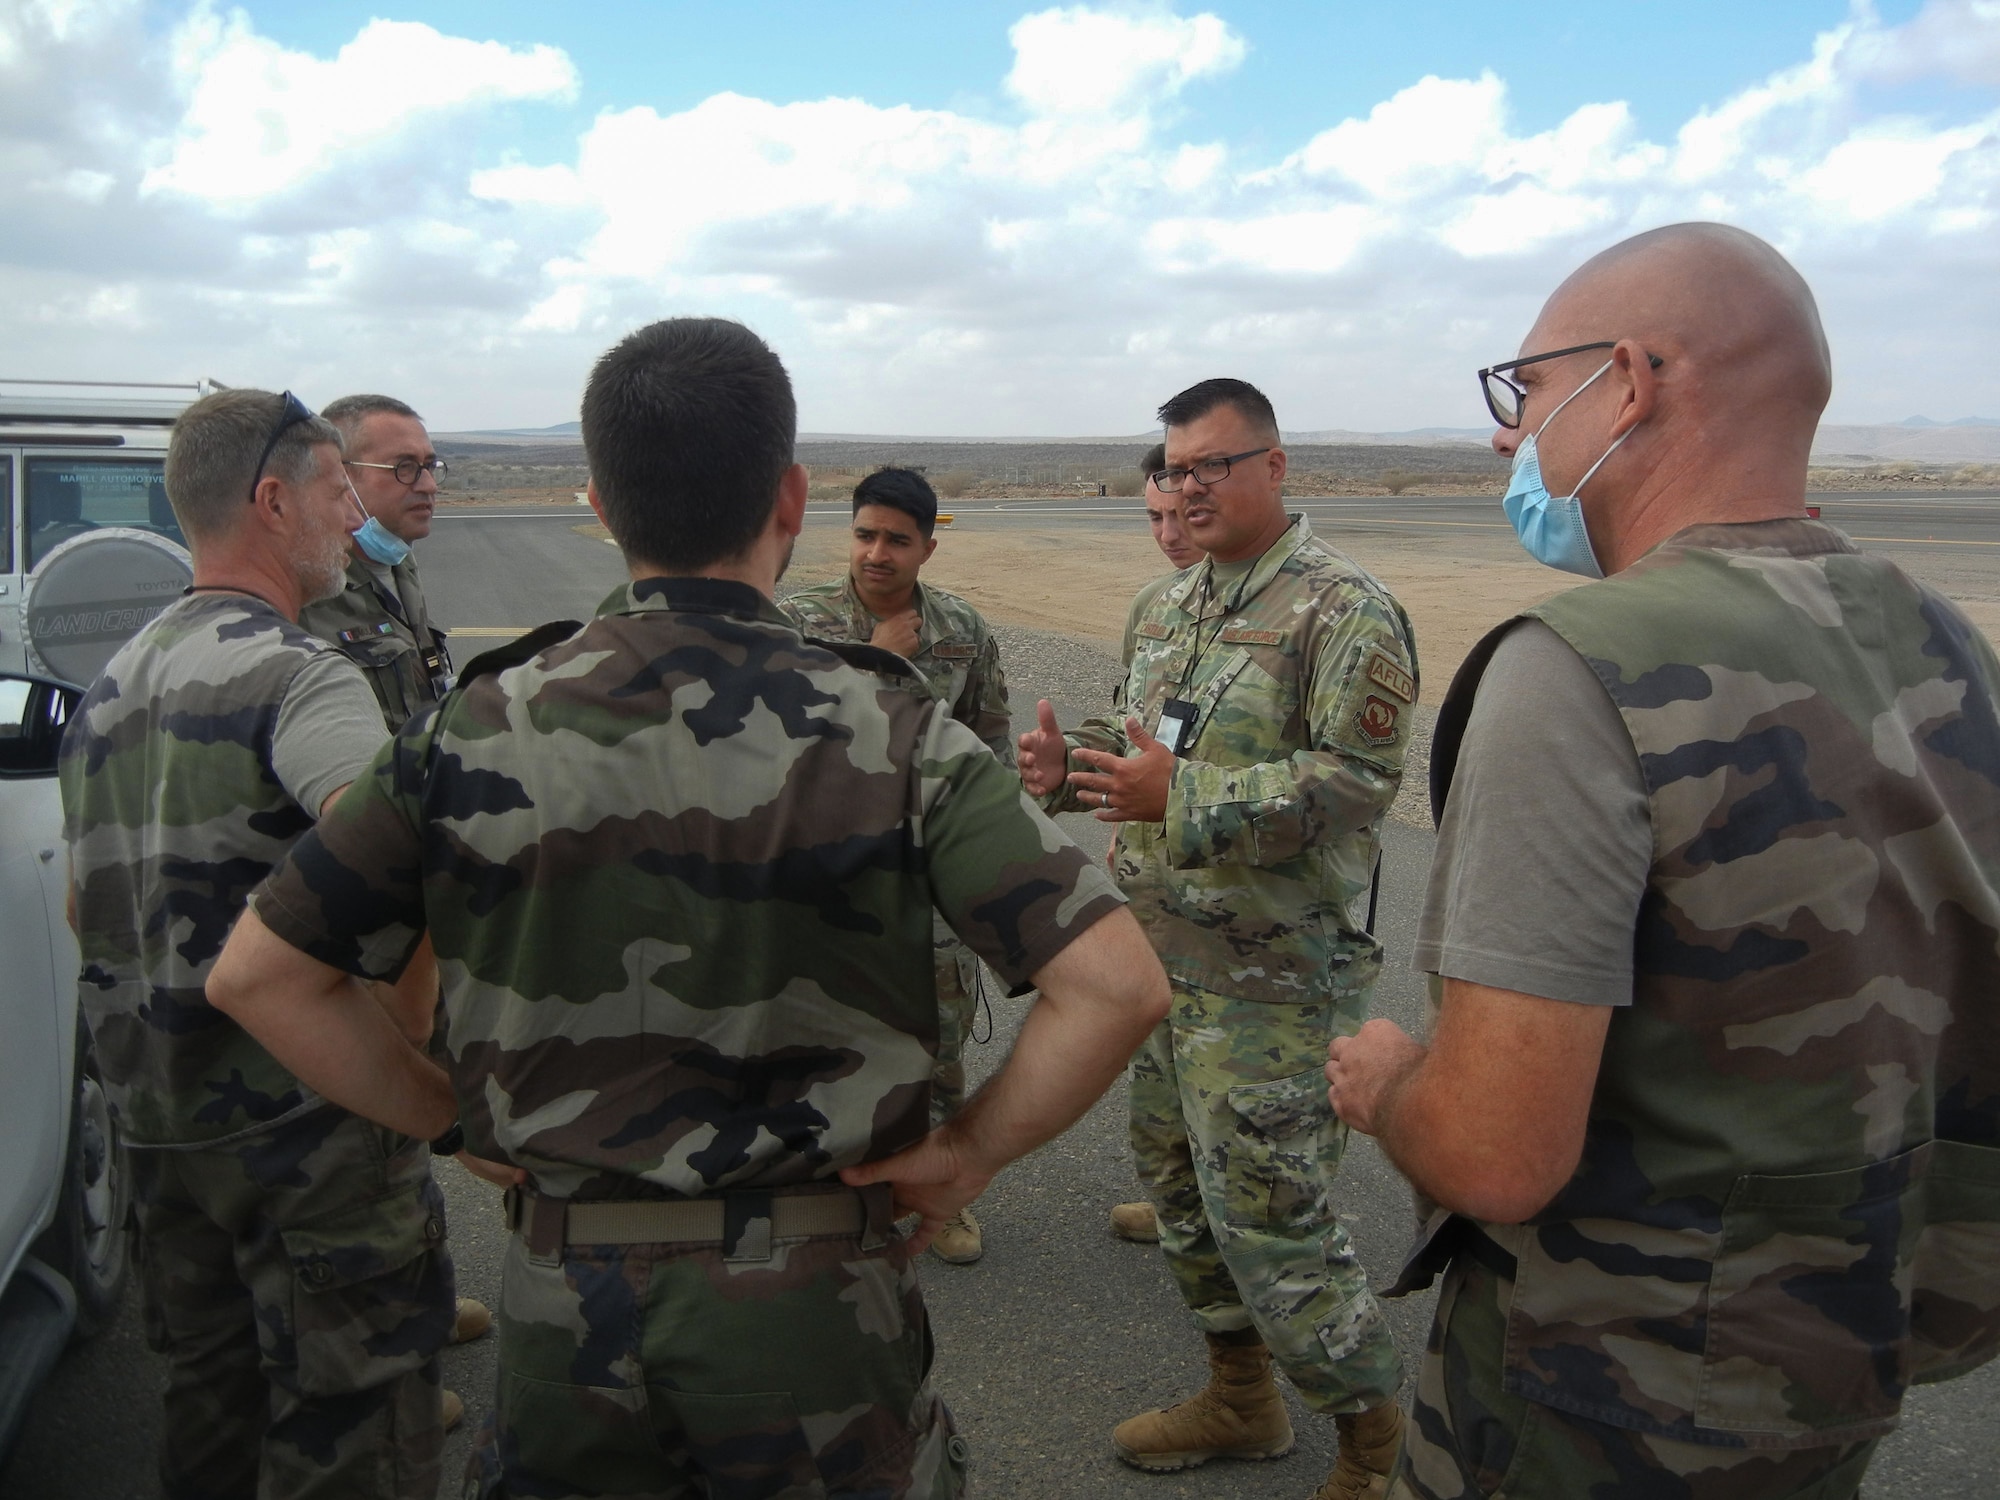 Airmen from the 776th Expeditionary Air Base Squadron airfield operations flight hosted members from the French military to discuss runway repairs at Chabelley Airfield (CADJ), Djibouti, March 10, 2022. As a part of a trilateral agreement, CADJ is a French installation operated by the United States in the country of Djibouti demonstrating the various partnerships and alliances the U.S. relies on to strengthen defense institutions and counter a multitude of threats to ensure a more stable, prosperous Africa. (U.S. courtesy photo by Tech. Sgt. Joel Yerkey)